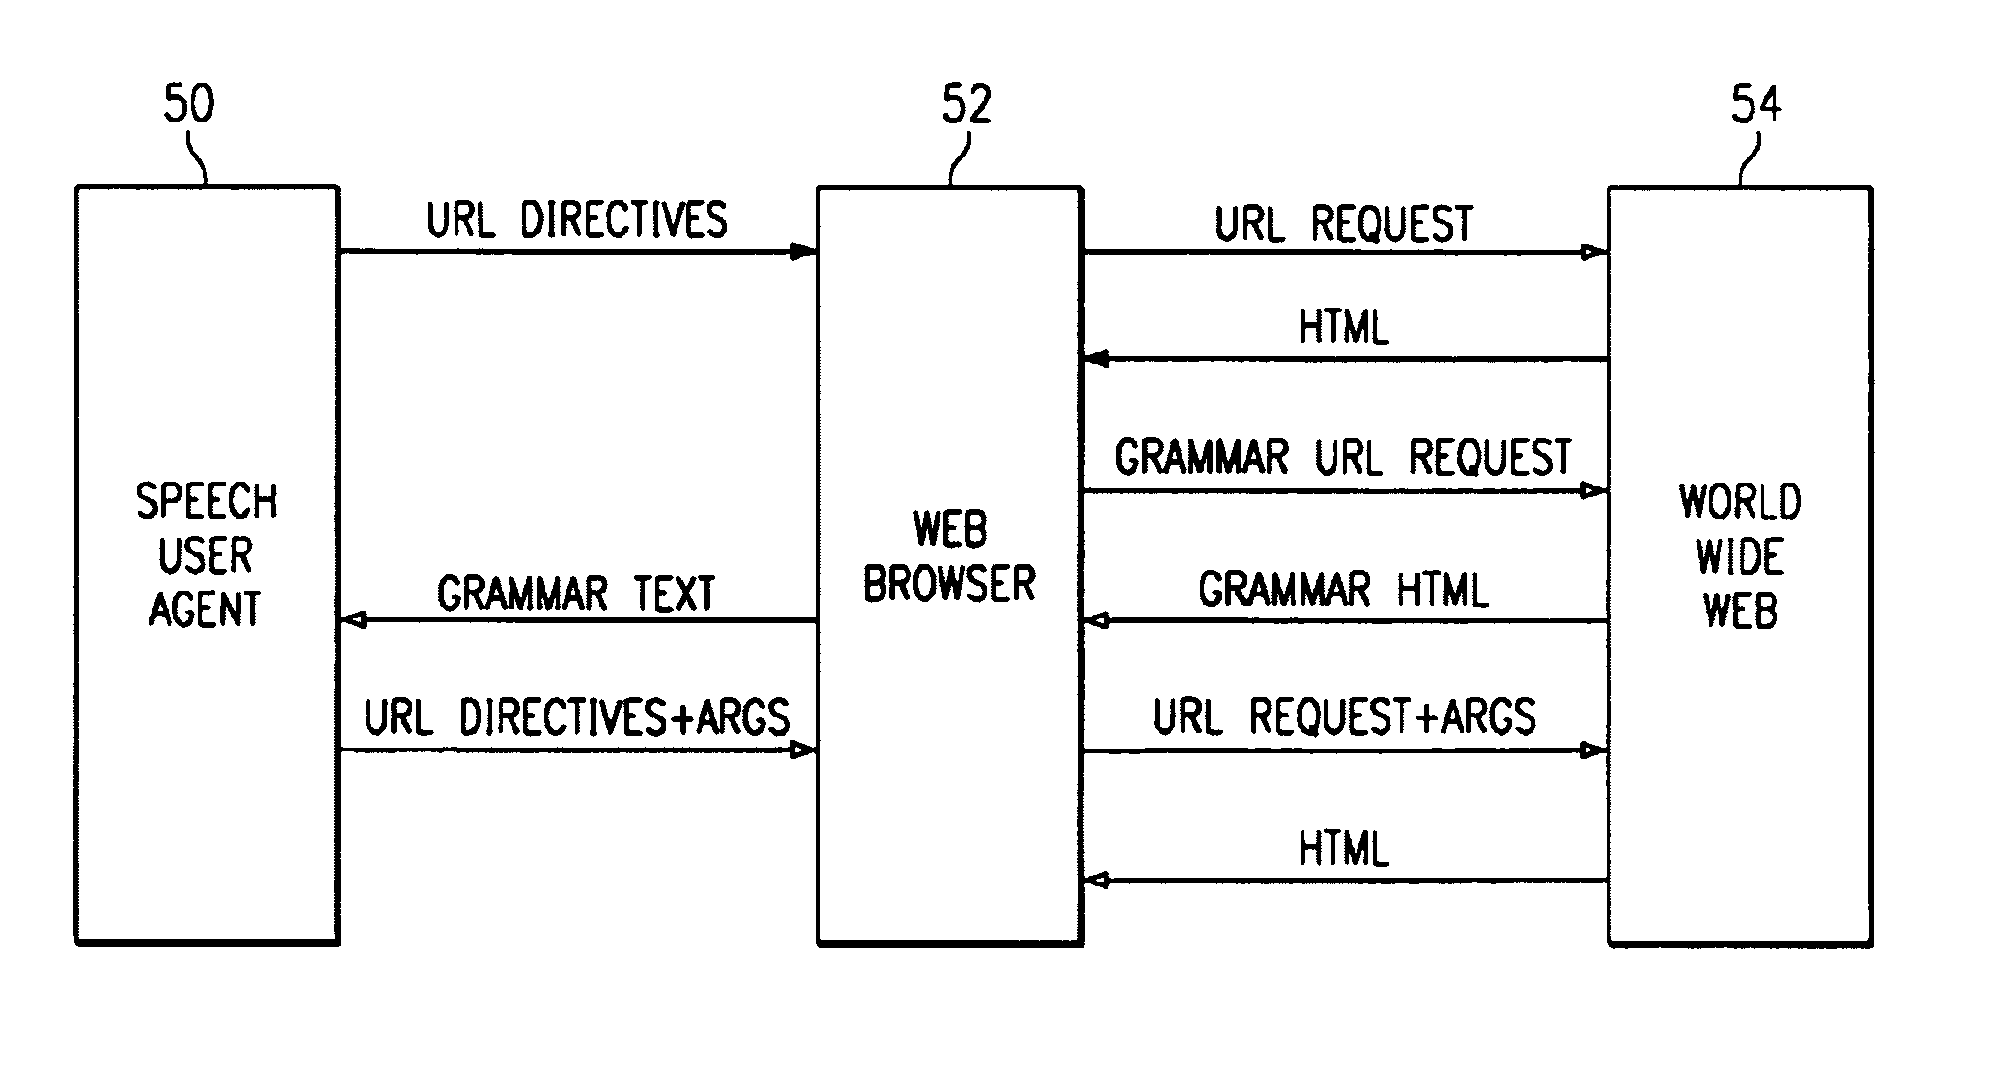 Voice activated apparatus for accessing information on the World Wide Web